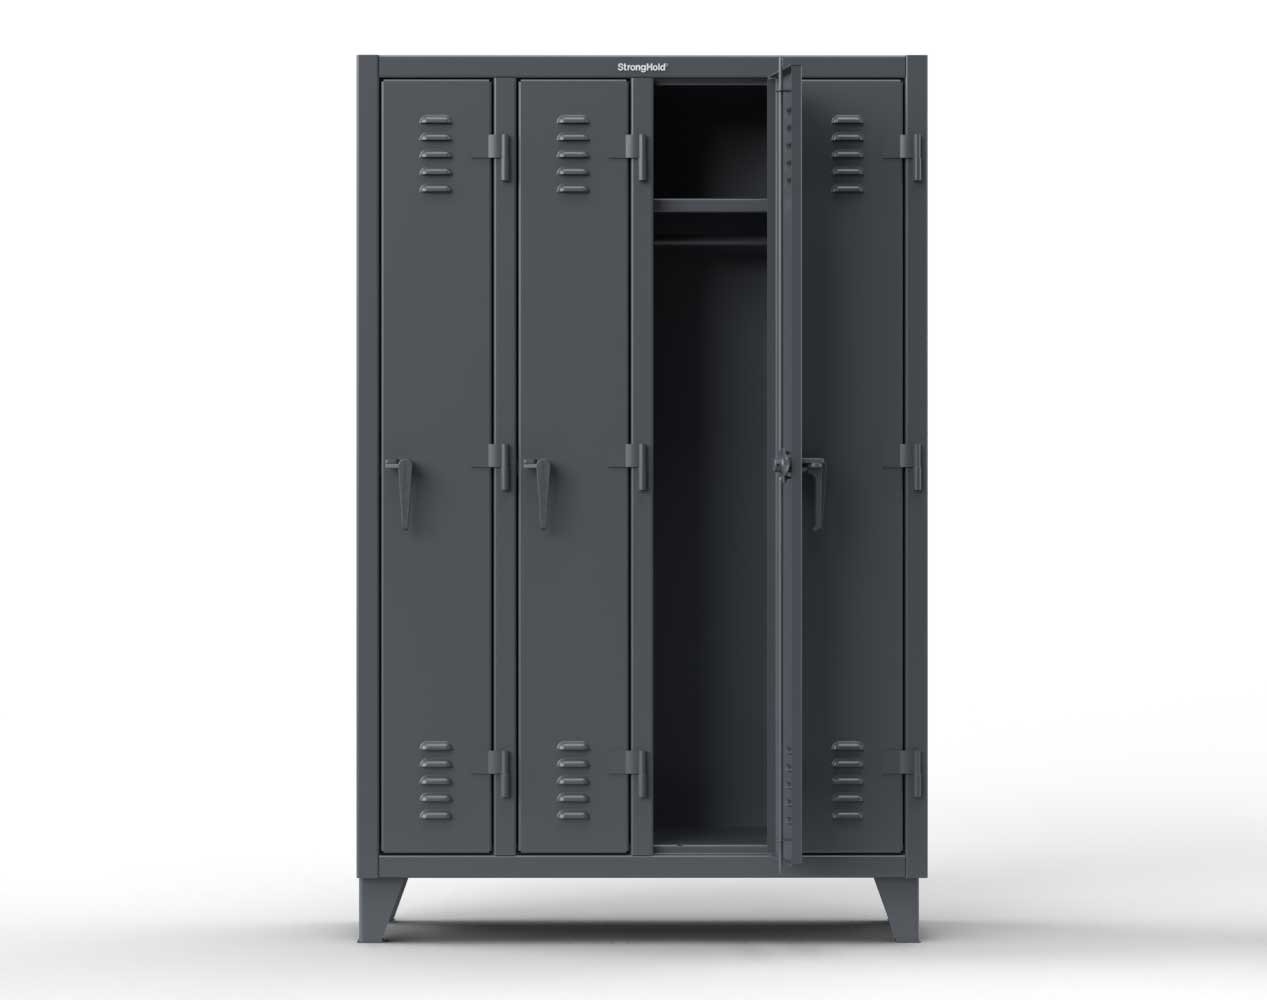 Extreme Duty 12 GA Single-Tier Locker with 3 Compartments, Louvered Doors, Wardrobe Rod - 38 in. W x 18in. D x 78 in. H